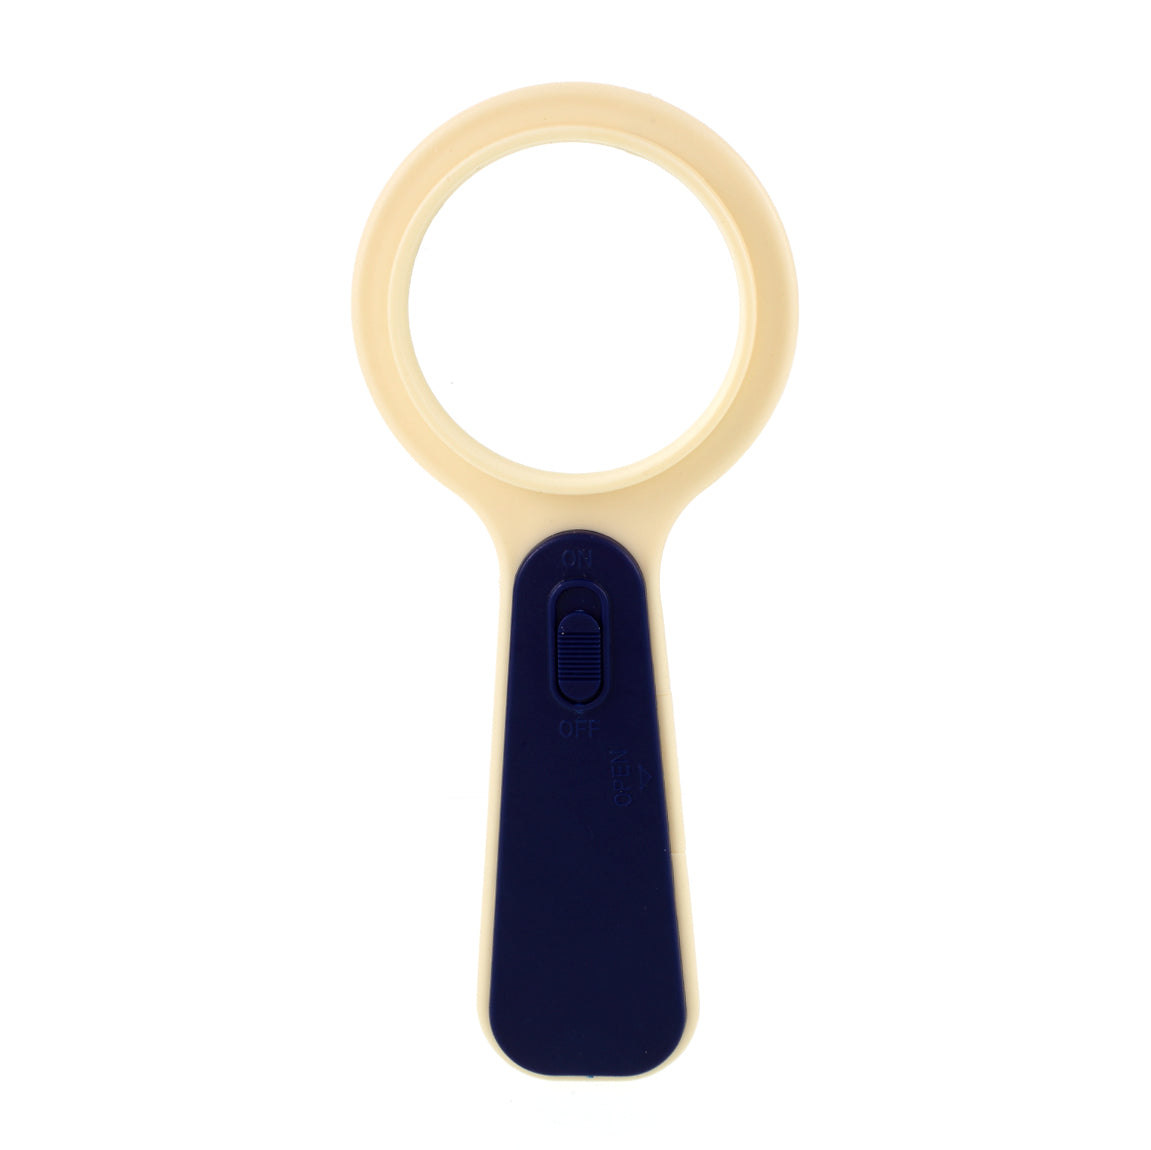 LONG JIE LJ-009 Magnifying Glass with White Light Source